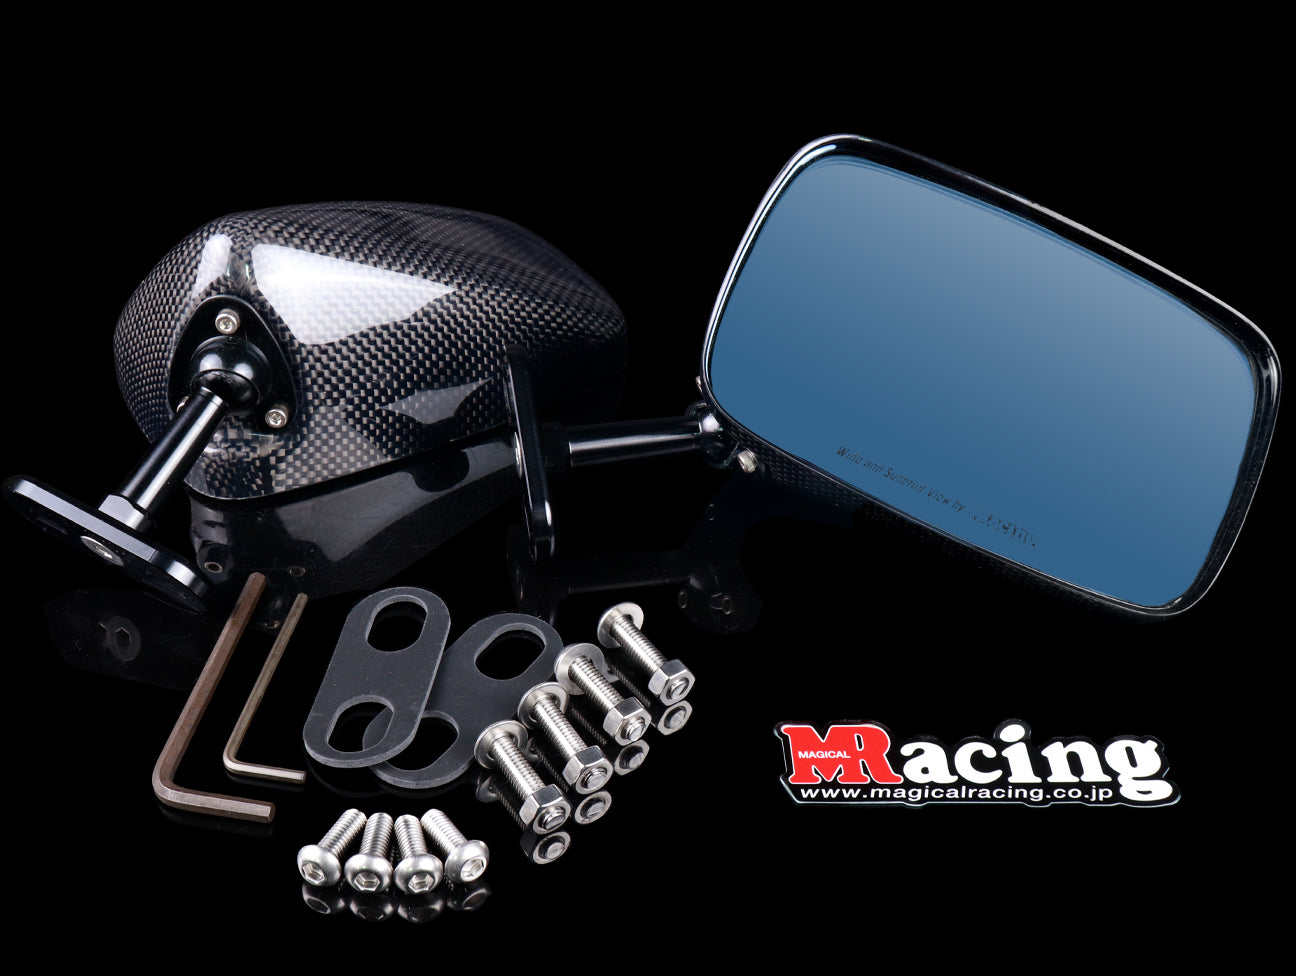 Magical Racing RR Carbon Mirrors - Type 5